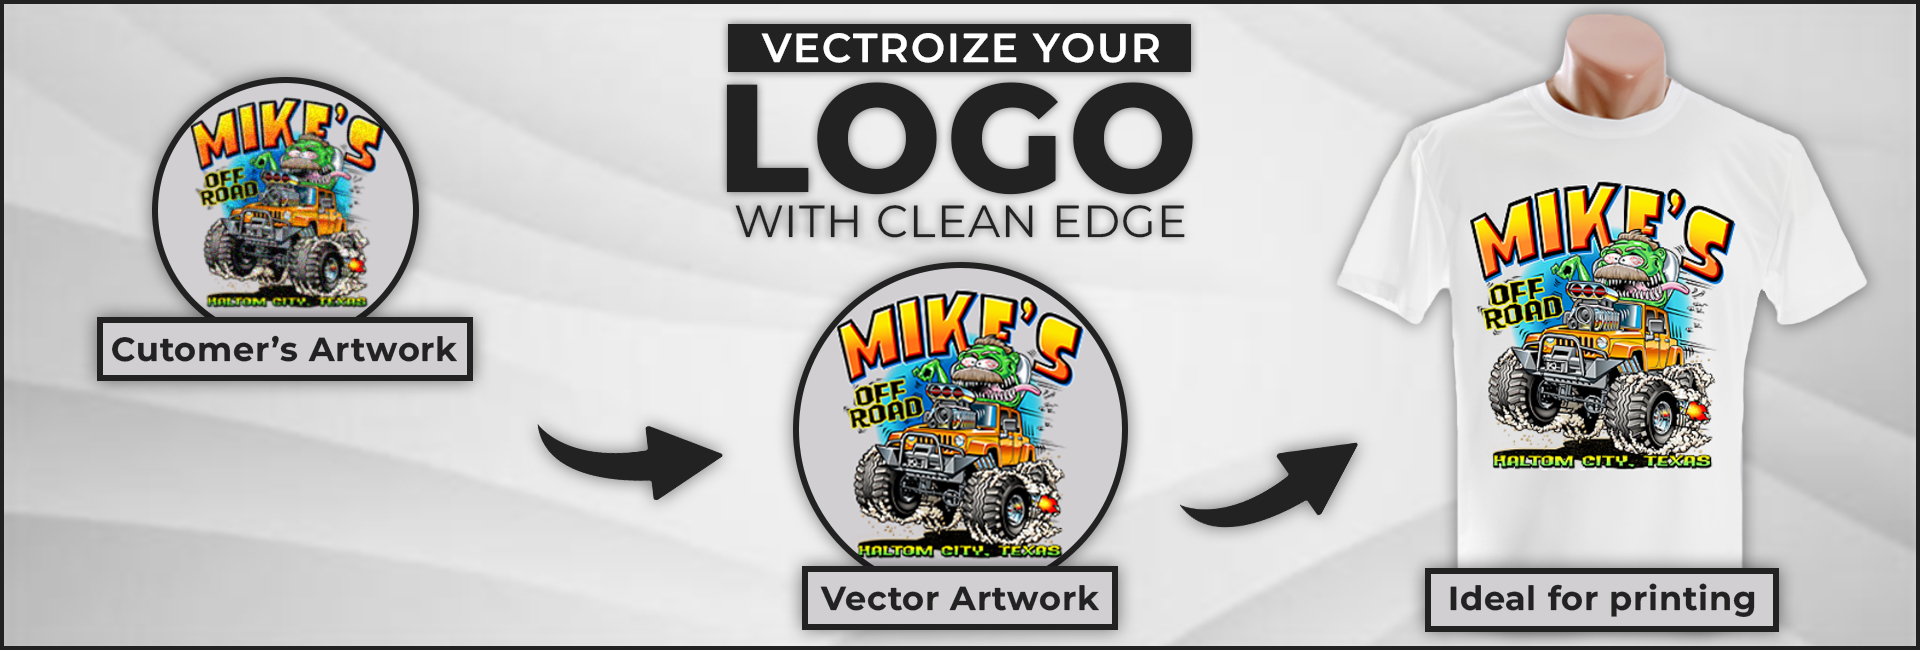 vectorize your logo with clean edge